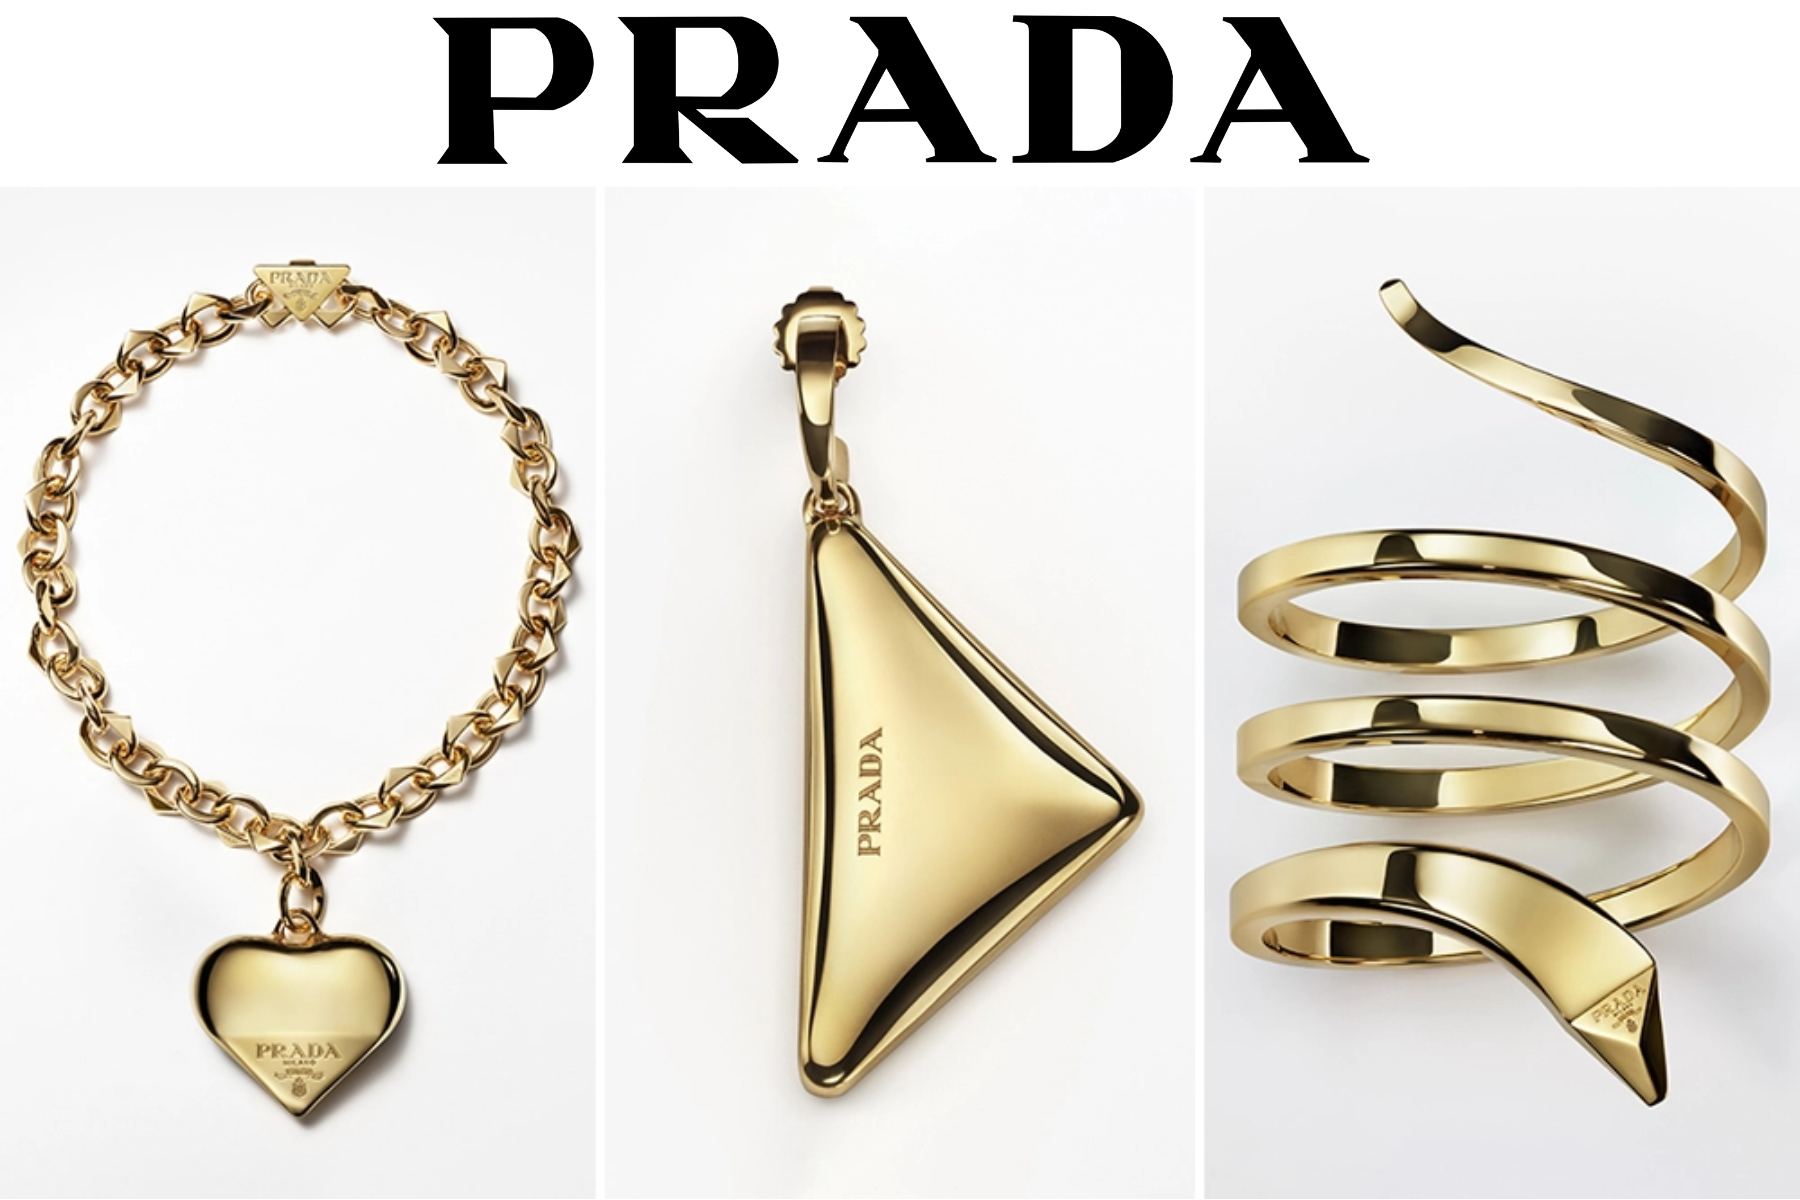 Prada Launches Its First Fine Jewelry Line